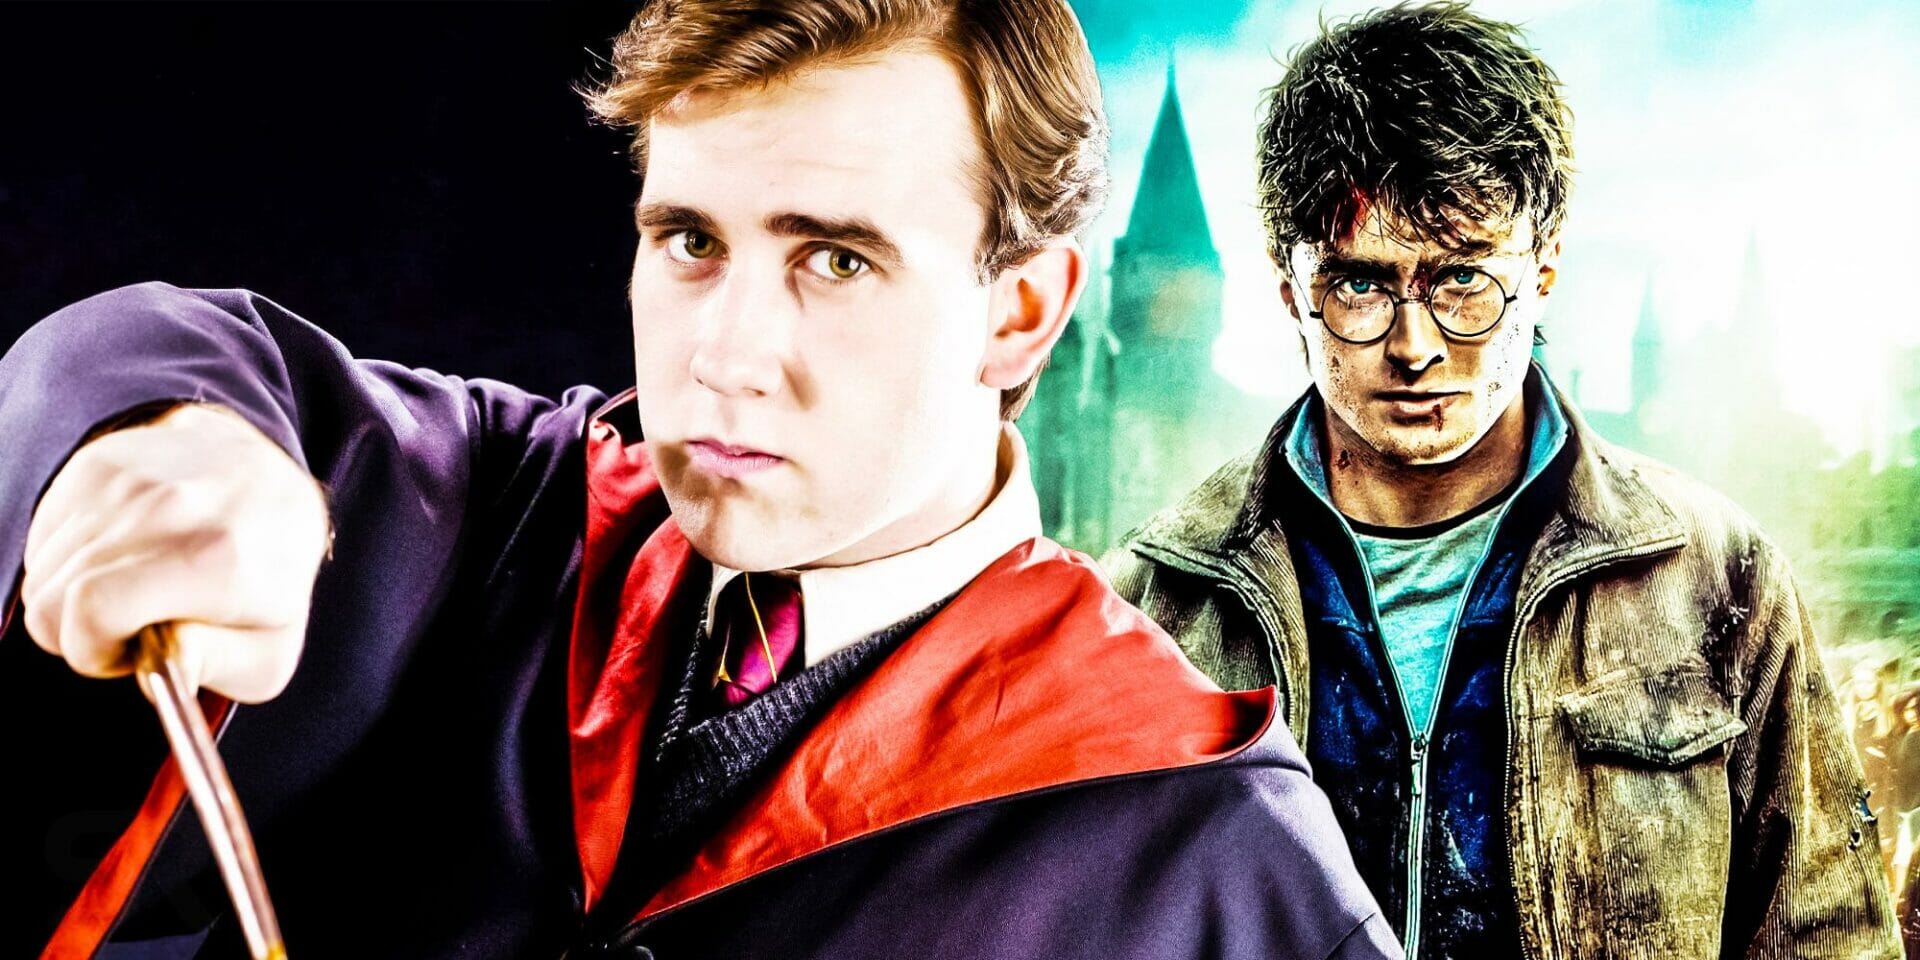 7 Saddest Parts Of Neville Longbottom's Story That The Harry Potter Movies Left Out